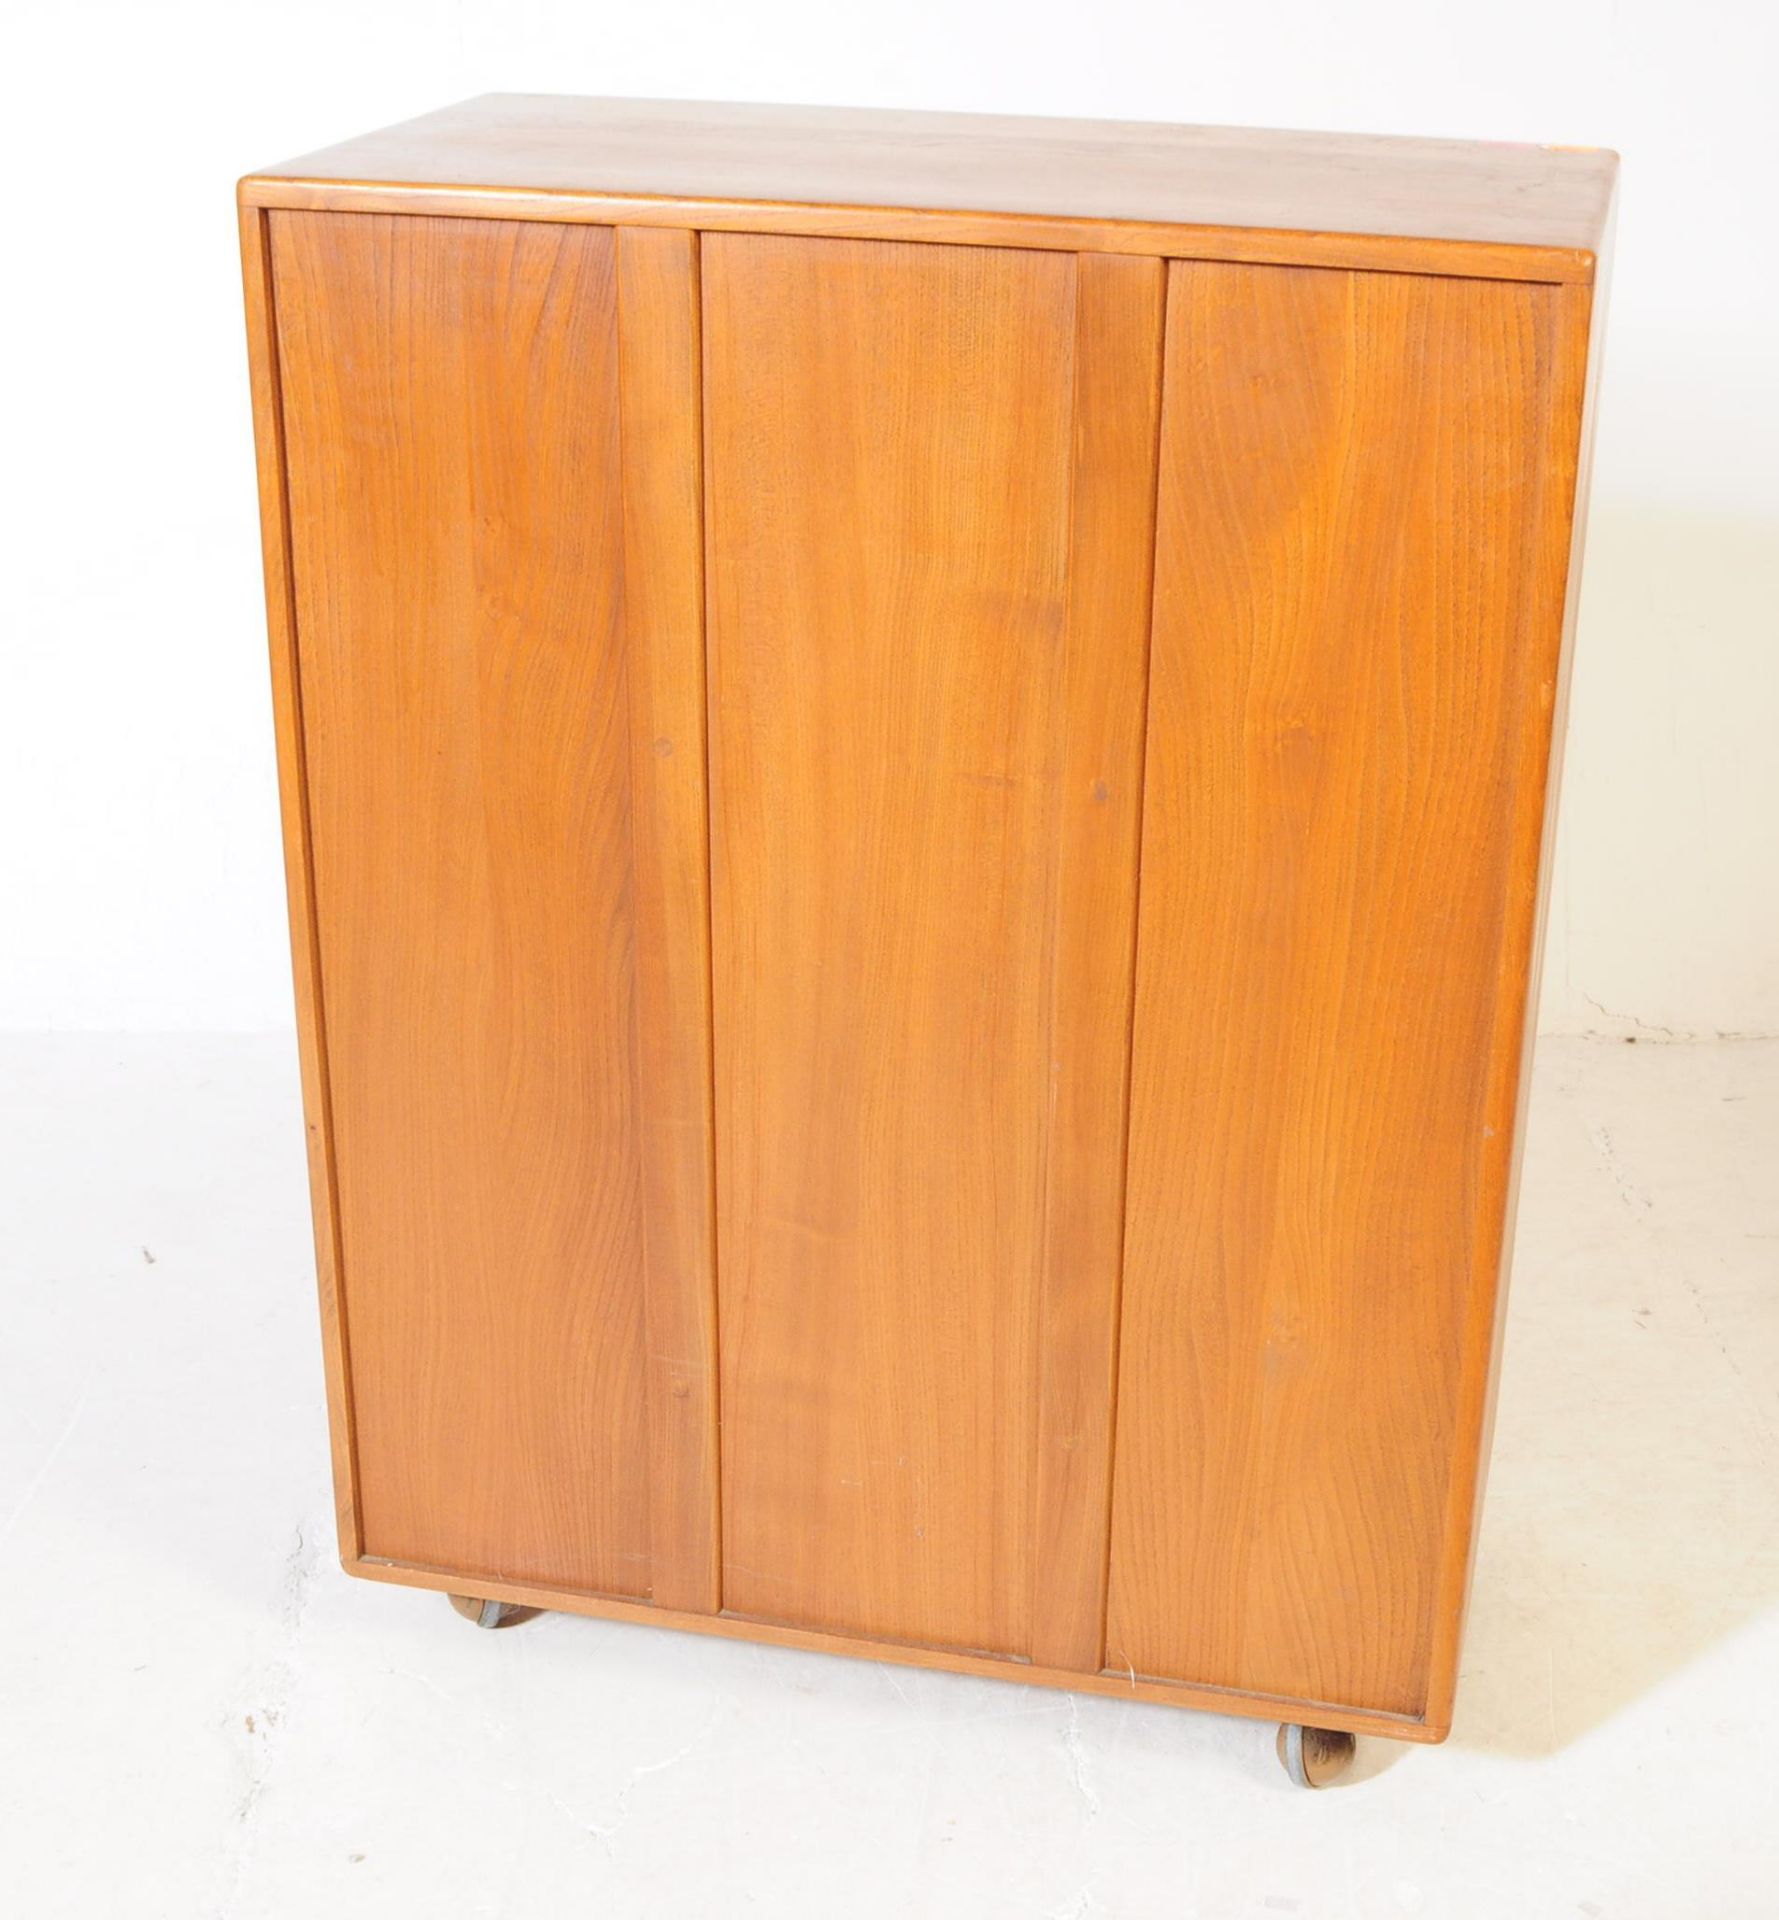 ERCOL MODEL 469 - BEECH WOOD SERVING CABINET - Image 7 of 7